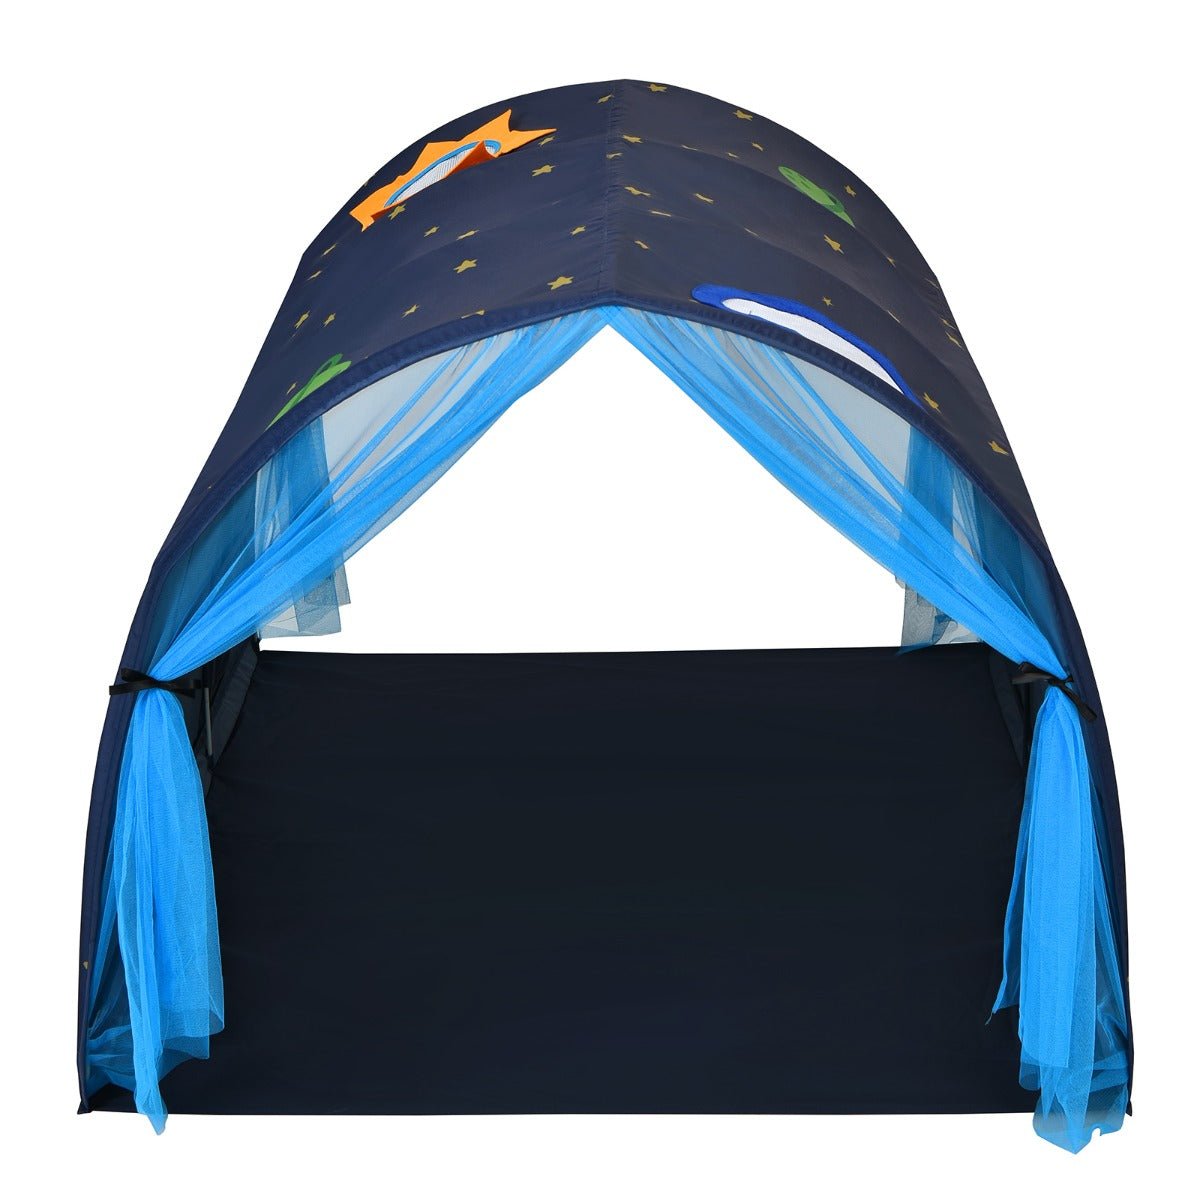 Adventure Starts Here: Twin Sleeping Tent Playhouse with Carry Bag